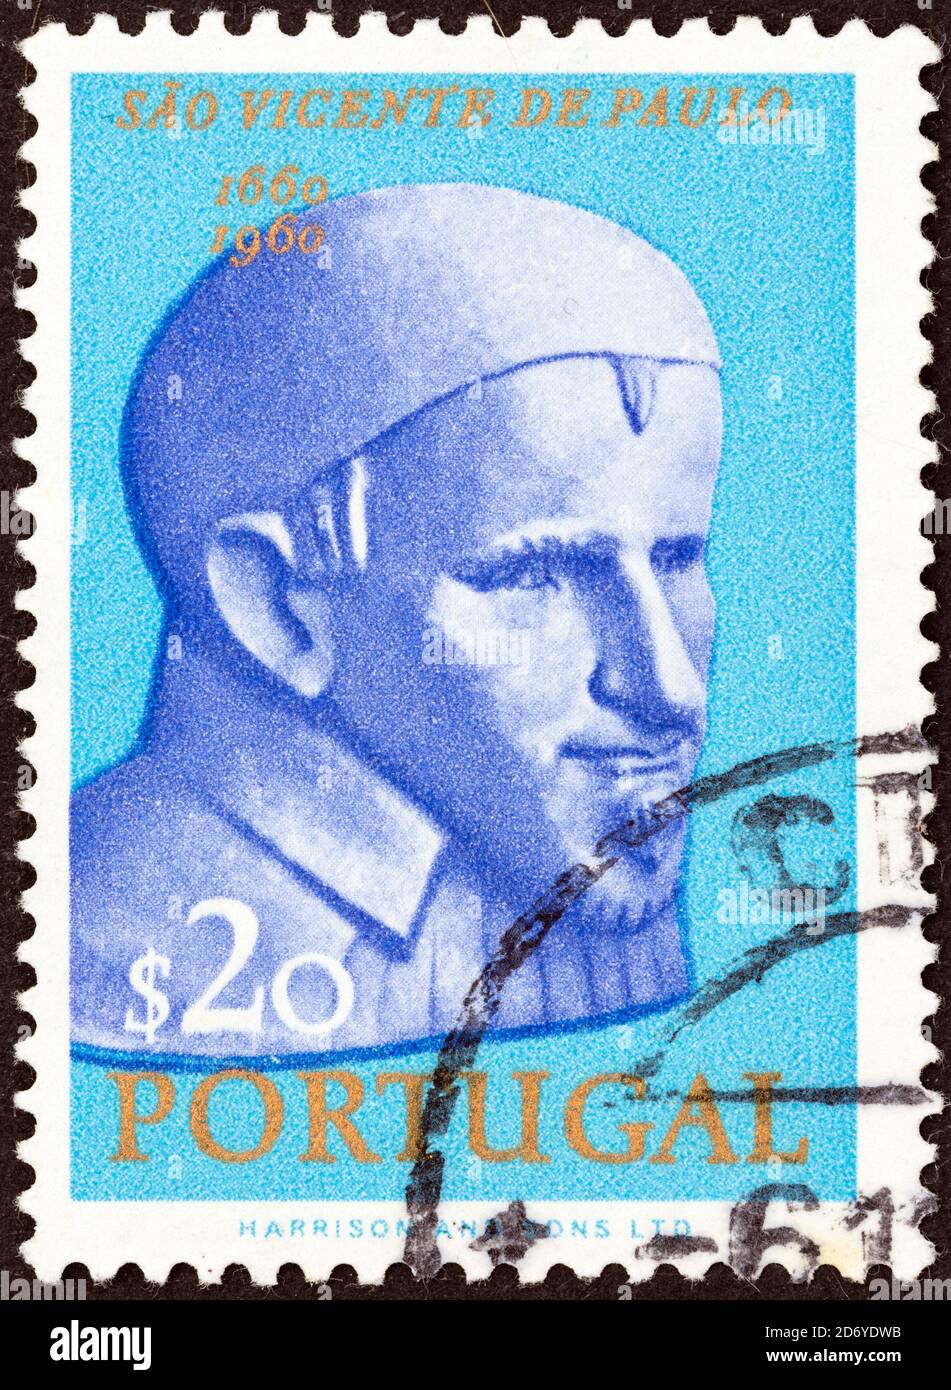 PORTUGAL - CIRCA 1963: A stamp printed in Portugal issued for the 300th death anniversary of St. Vincent de Paul shows St. Vincent de Paul. Stock Photo